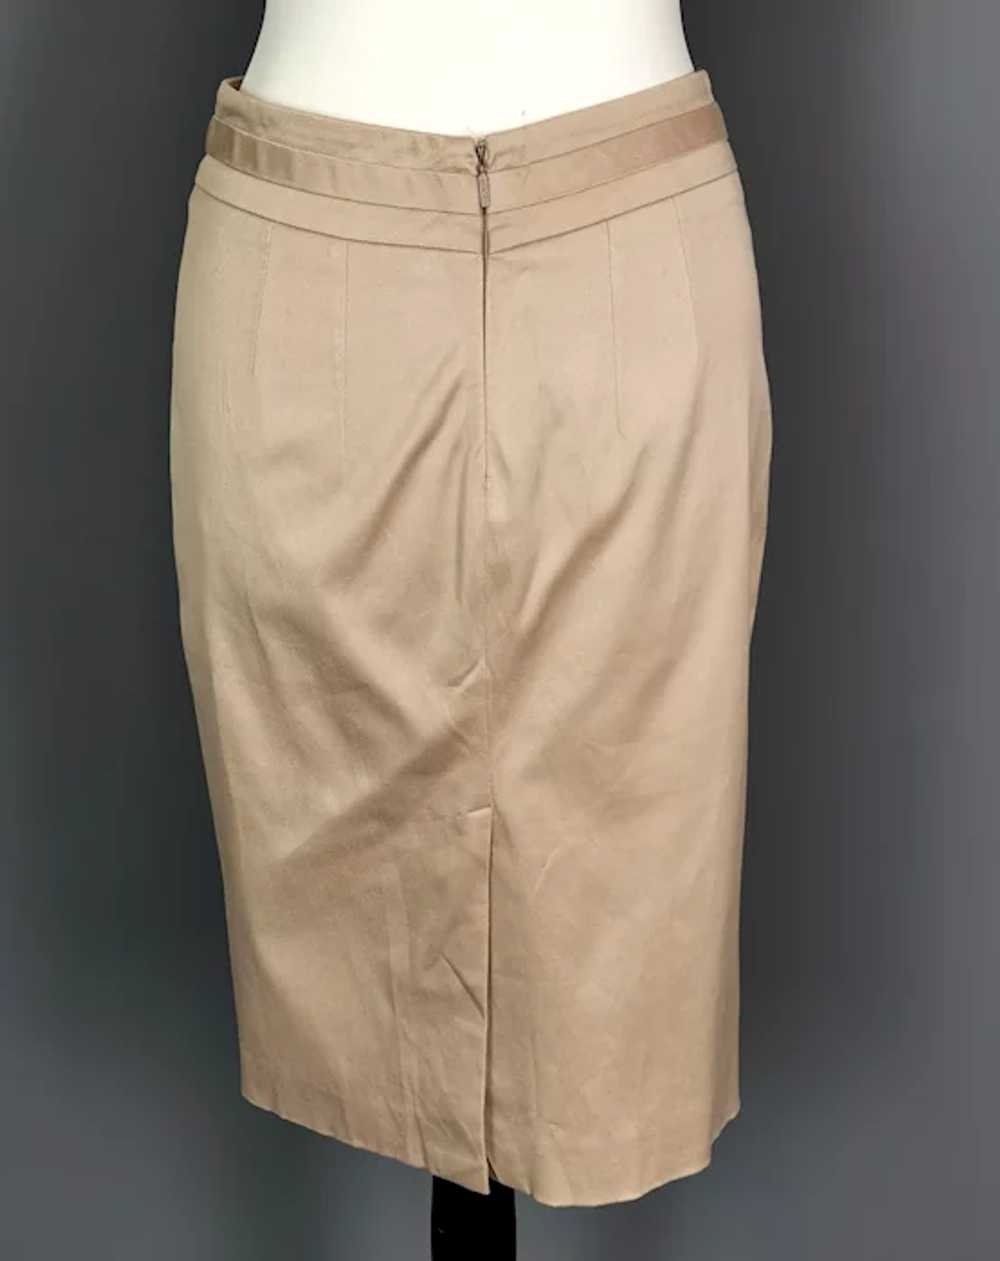 Vintage Gucci Tom Ford bamboo trim pencil skirt - image 9